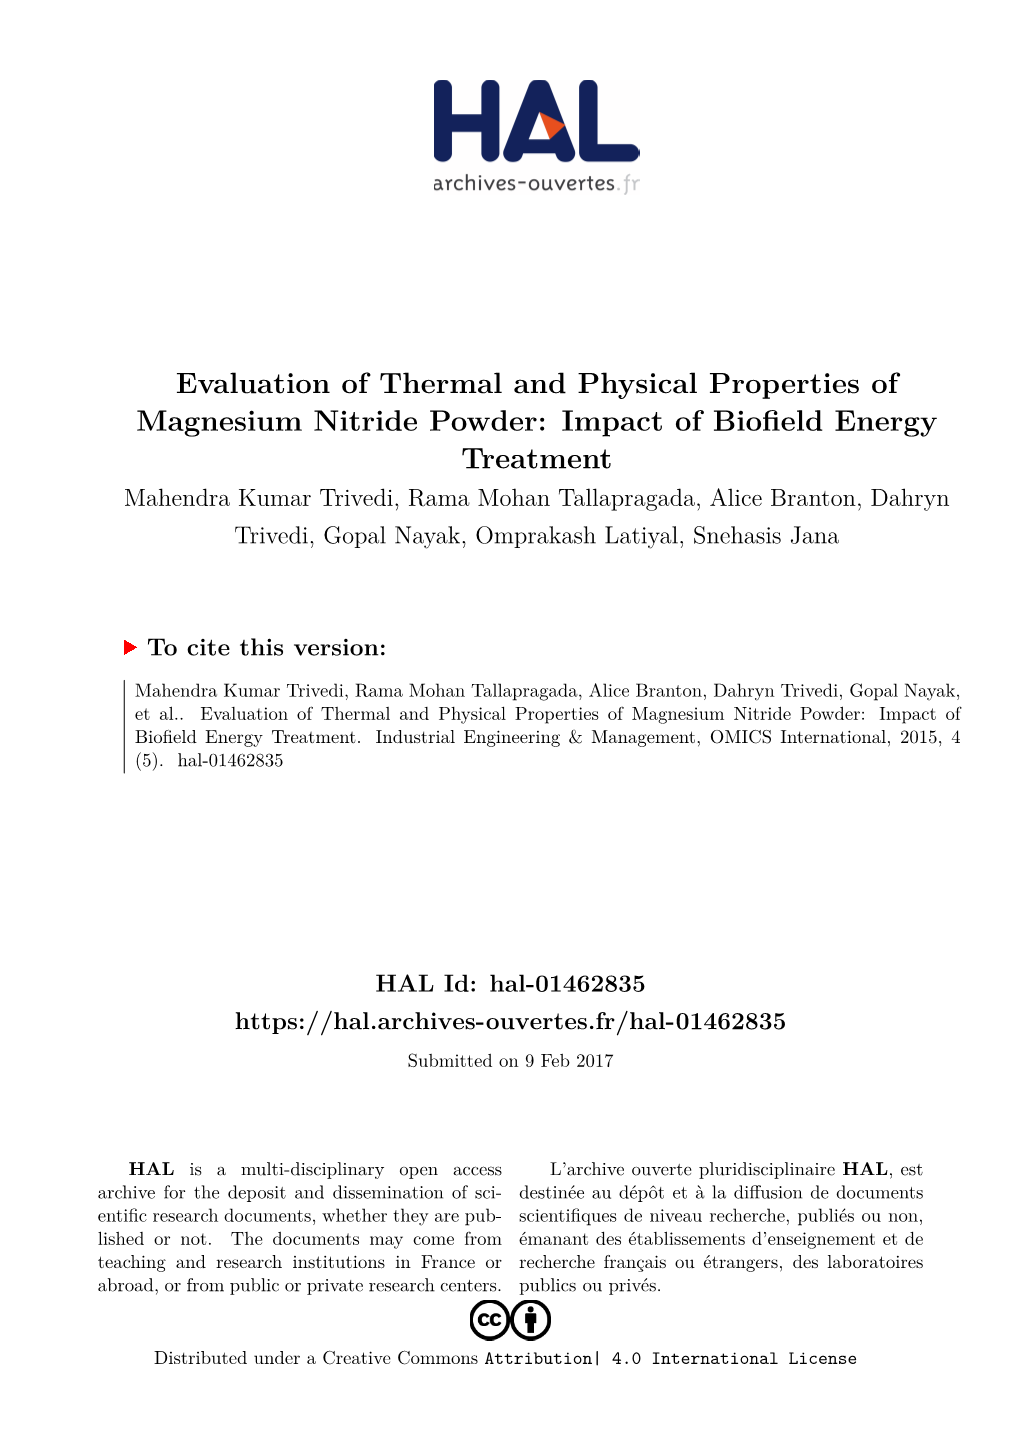 Evaluation of Thermal and Physical Properties of Magnesium Nitride